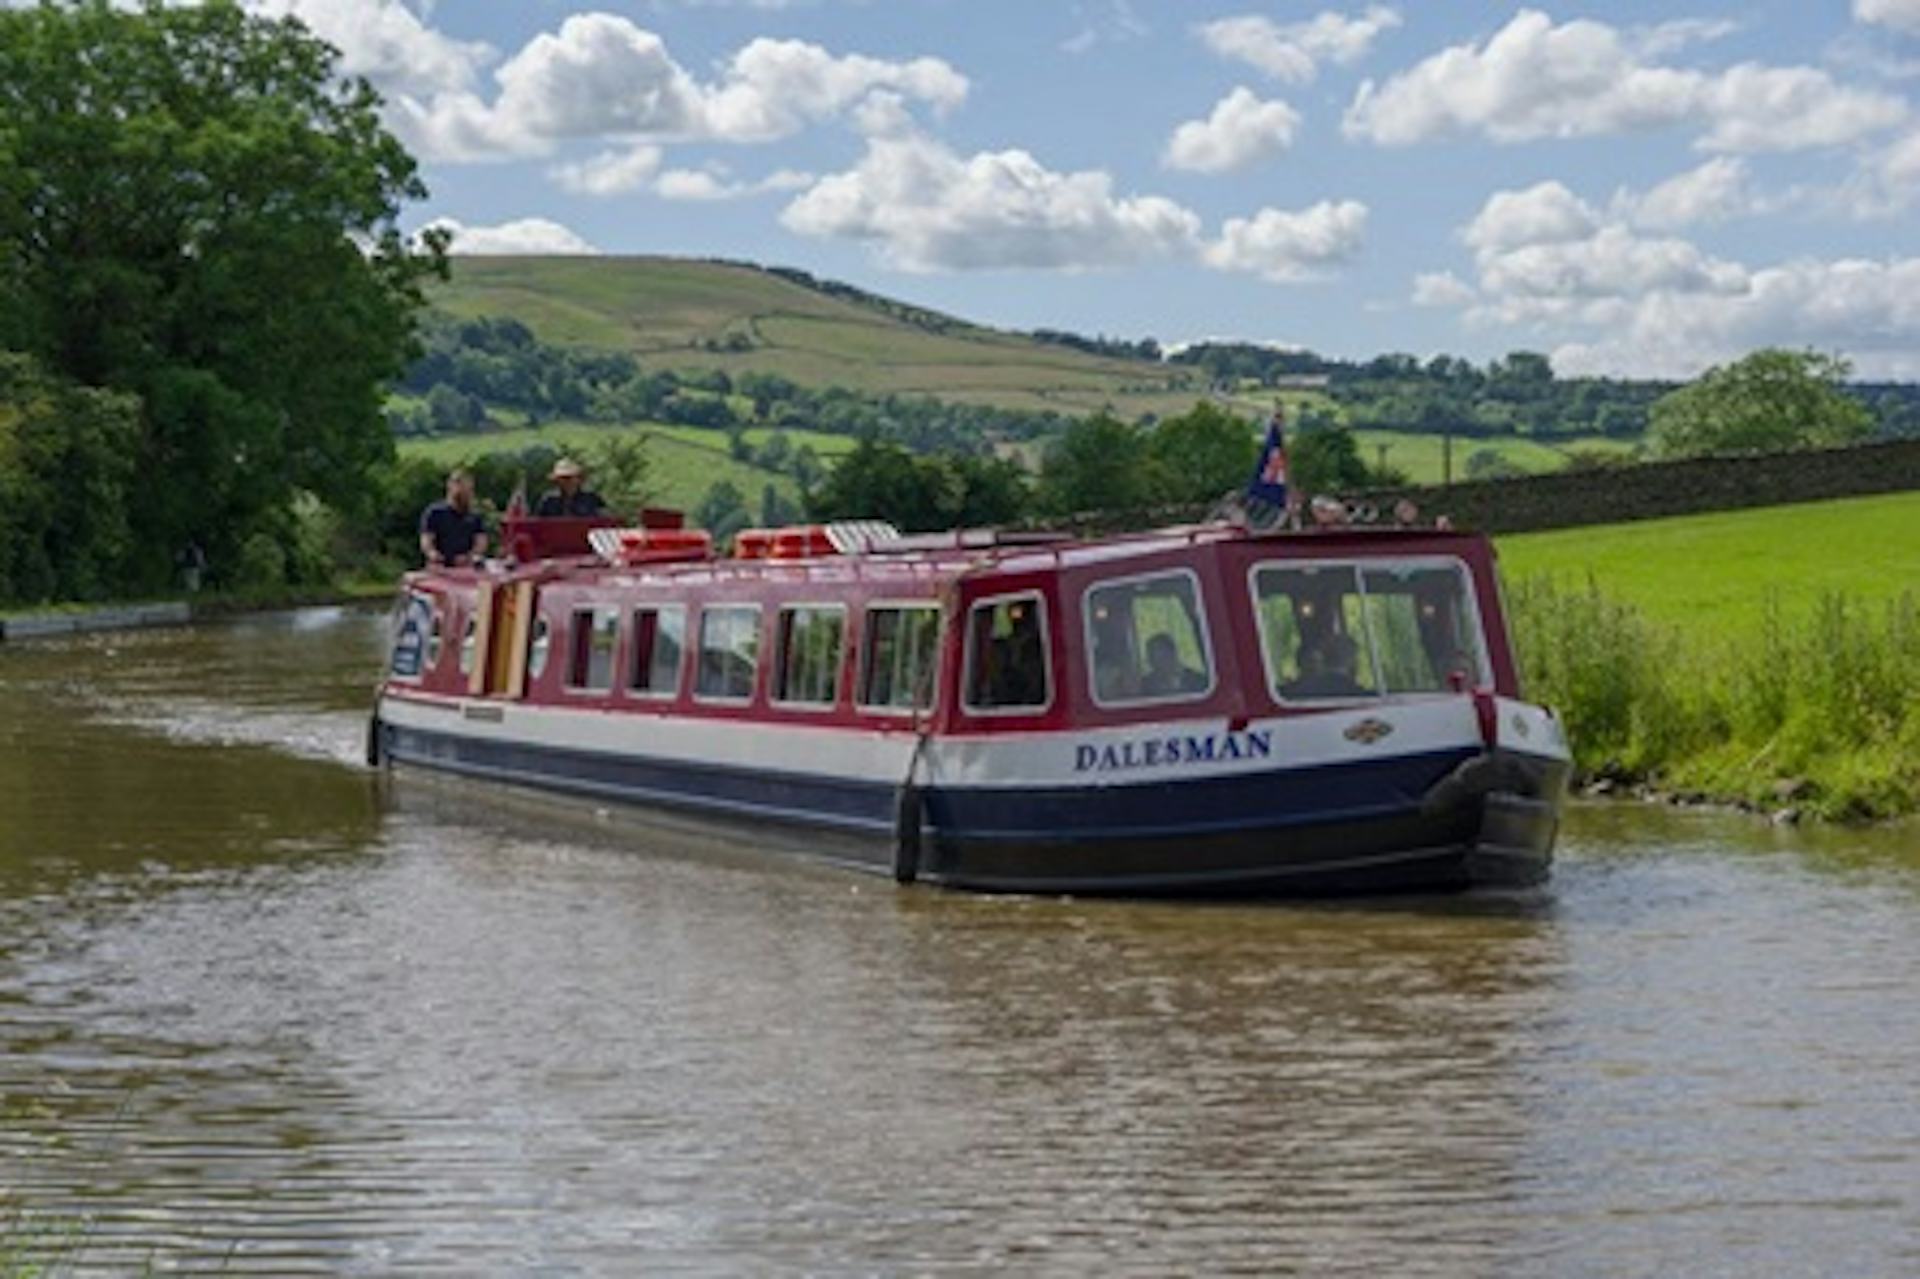 Sunday Roast Dinner Cruise on the Leeds & Liverpool Canal for Two